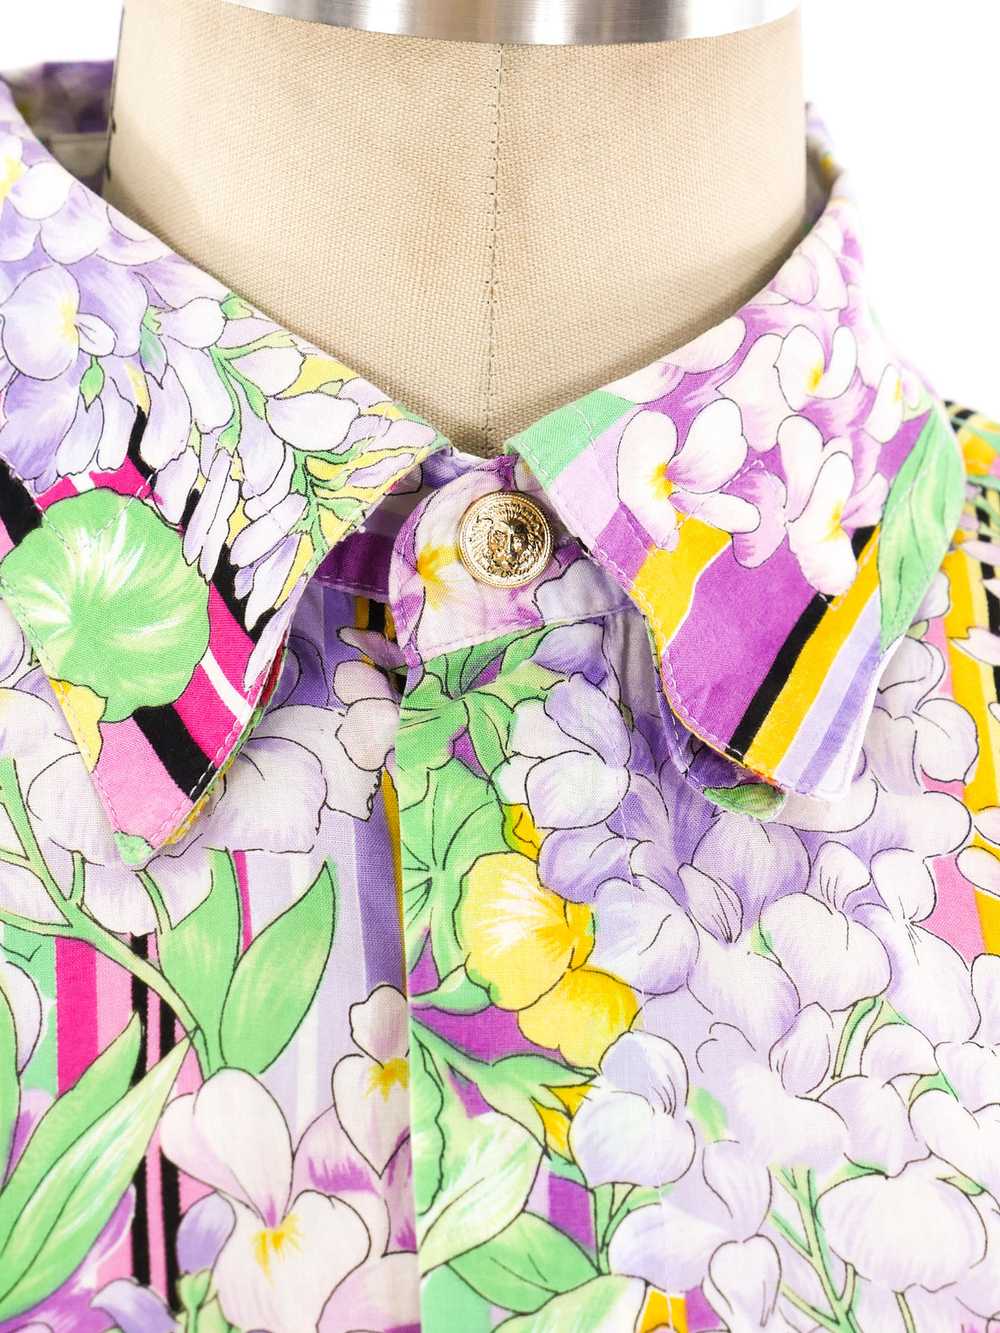 Versus by Gianni Versace Floral Printed Shirt - image 7